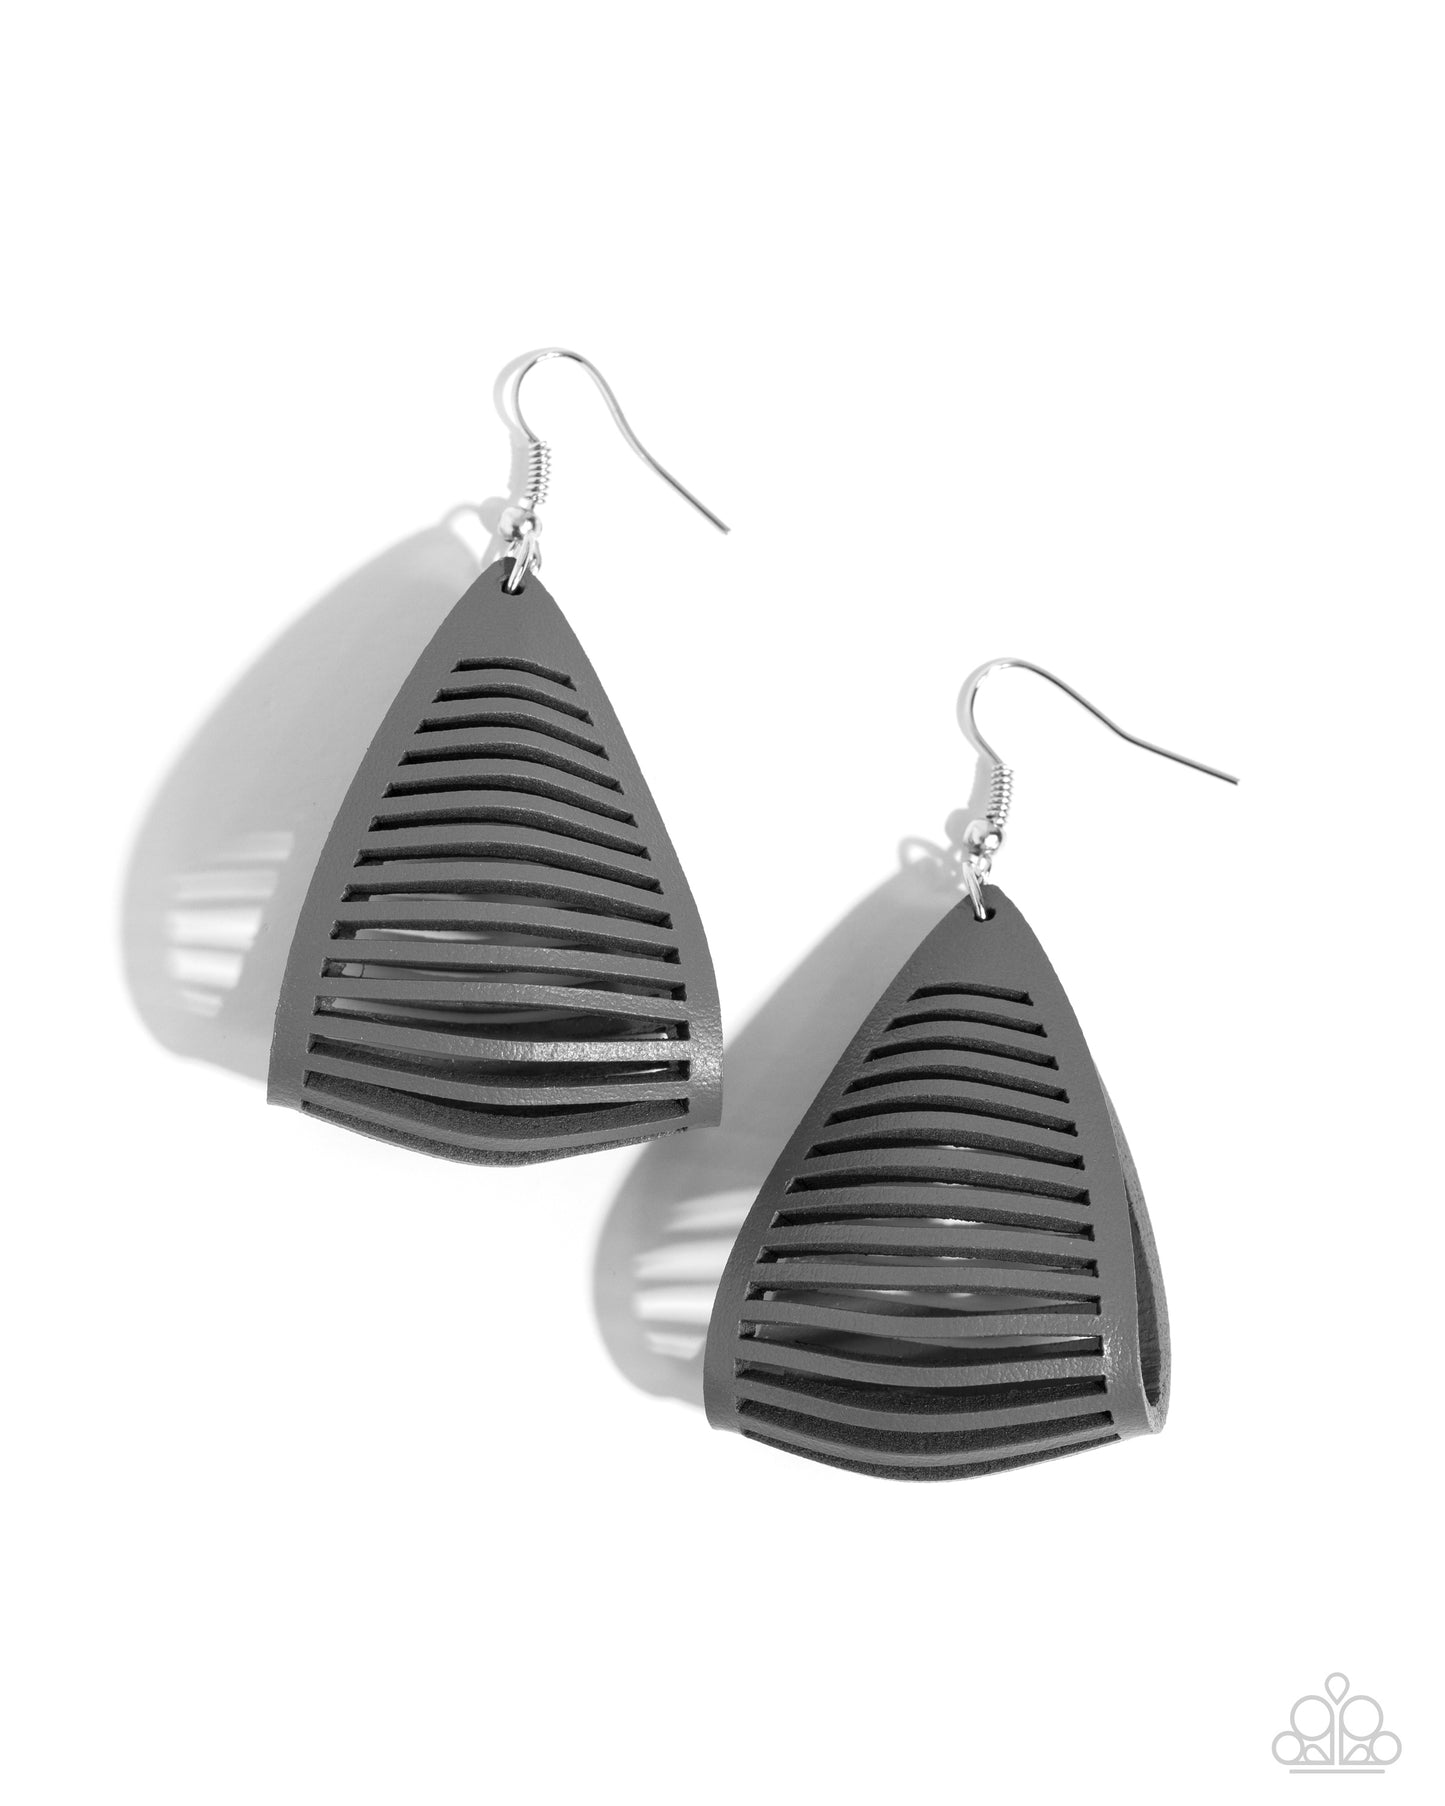 Paparazzi Accessories - In and OUTBACK - Silver Earrings yhe center of an Ultimate Gray leather frame is spliced into airy rows as it delicately folds into an edgy triangular frame, creating a seasonal fashion. Earring attaches to a standard fishhook fitting. Sold as one pair of earrings.